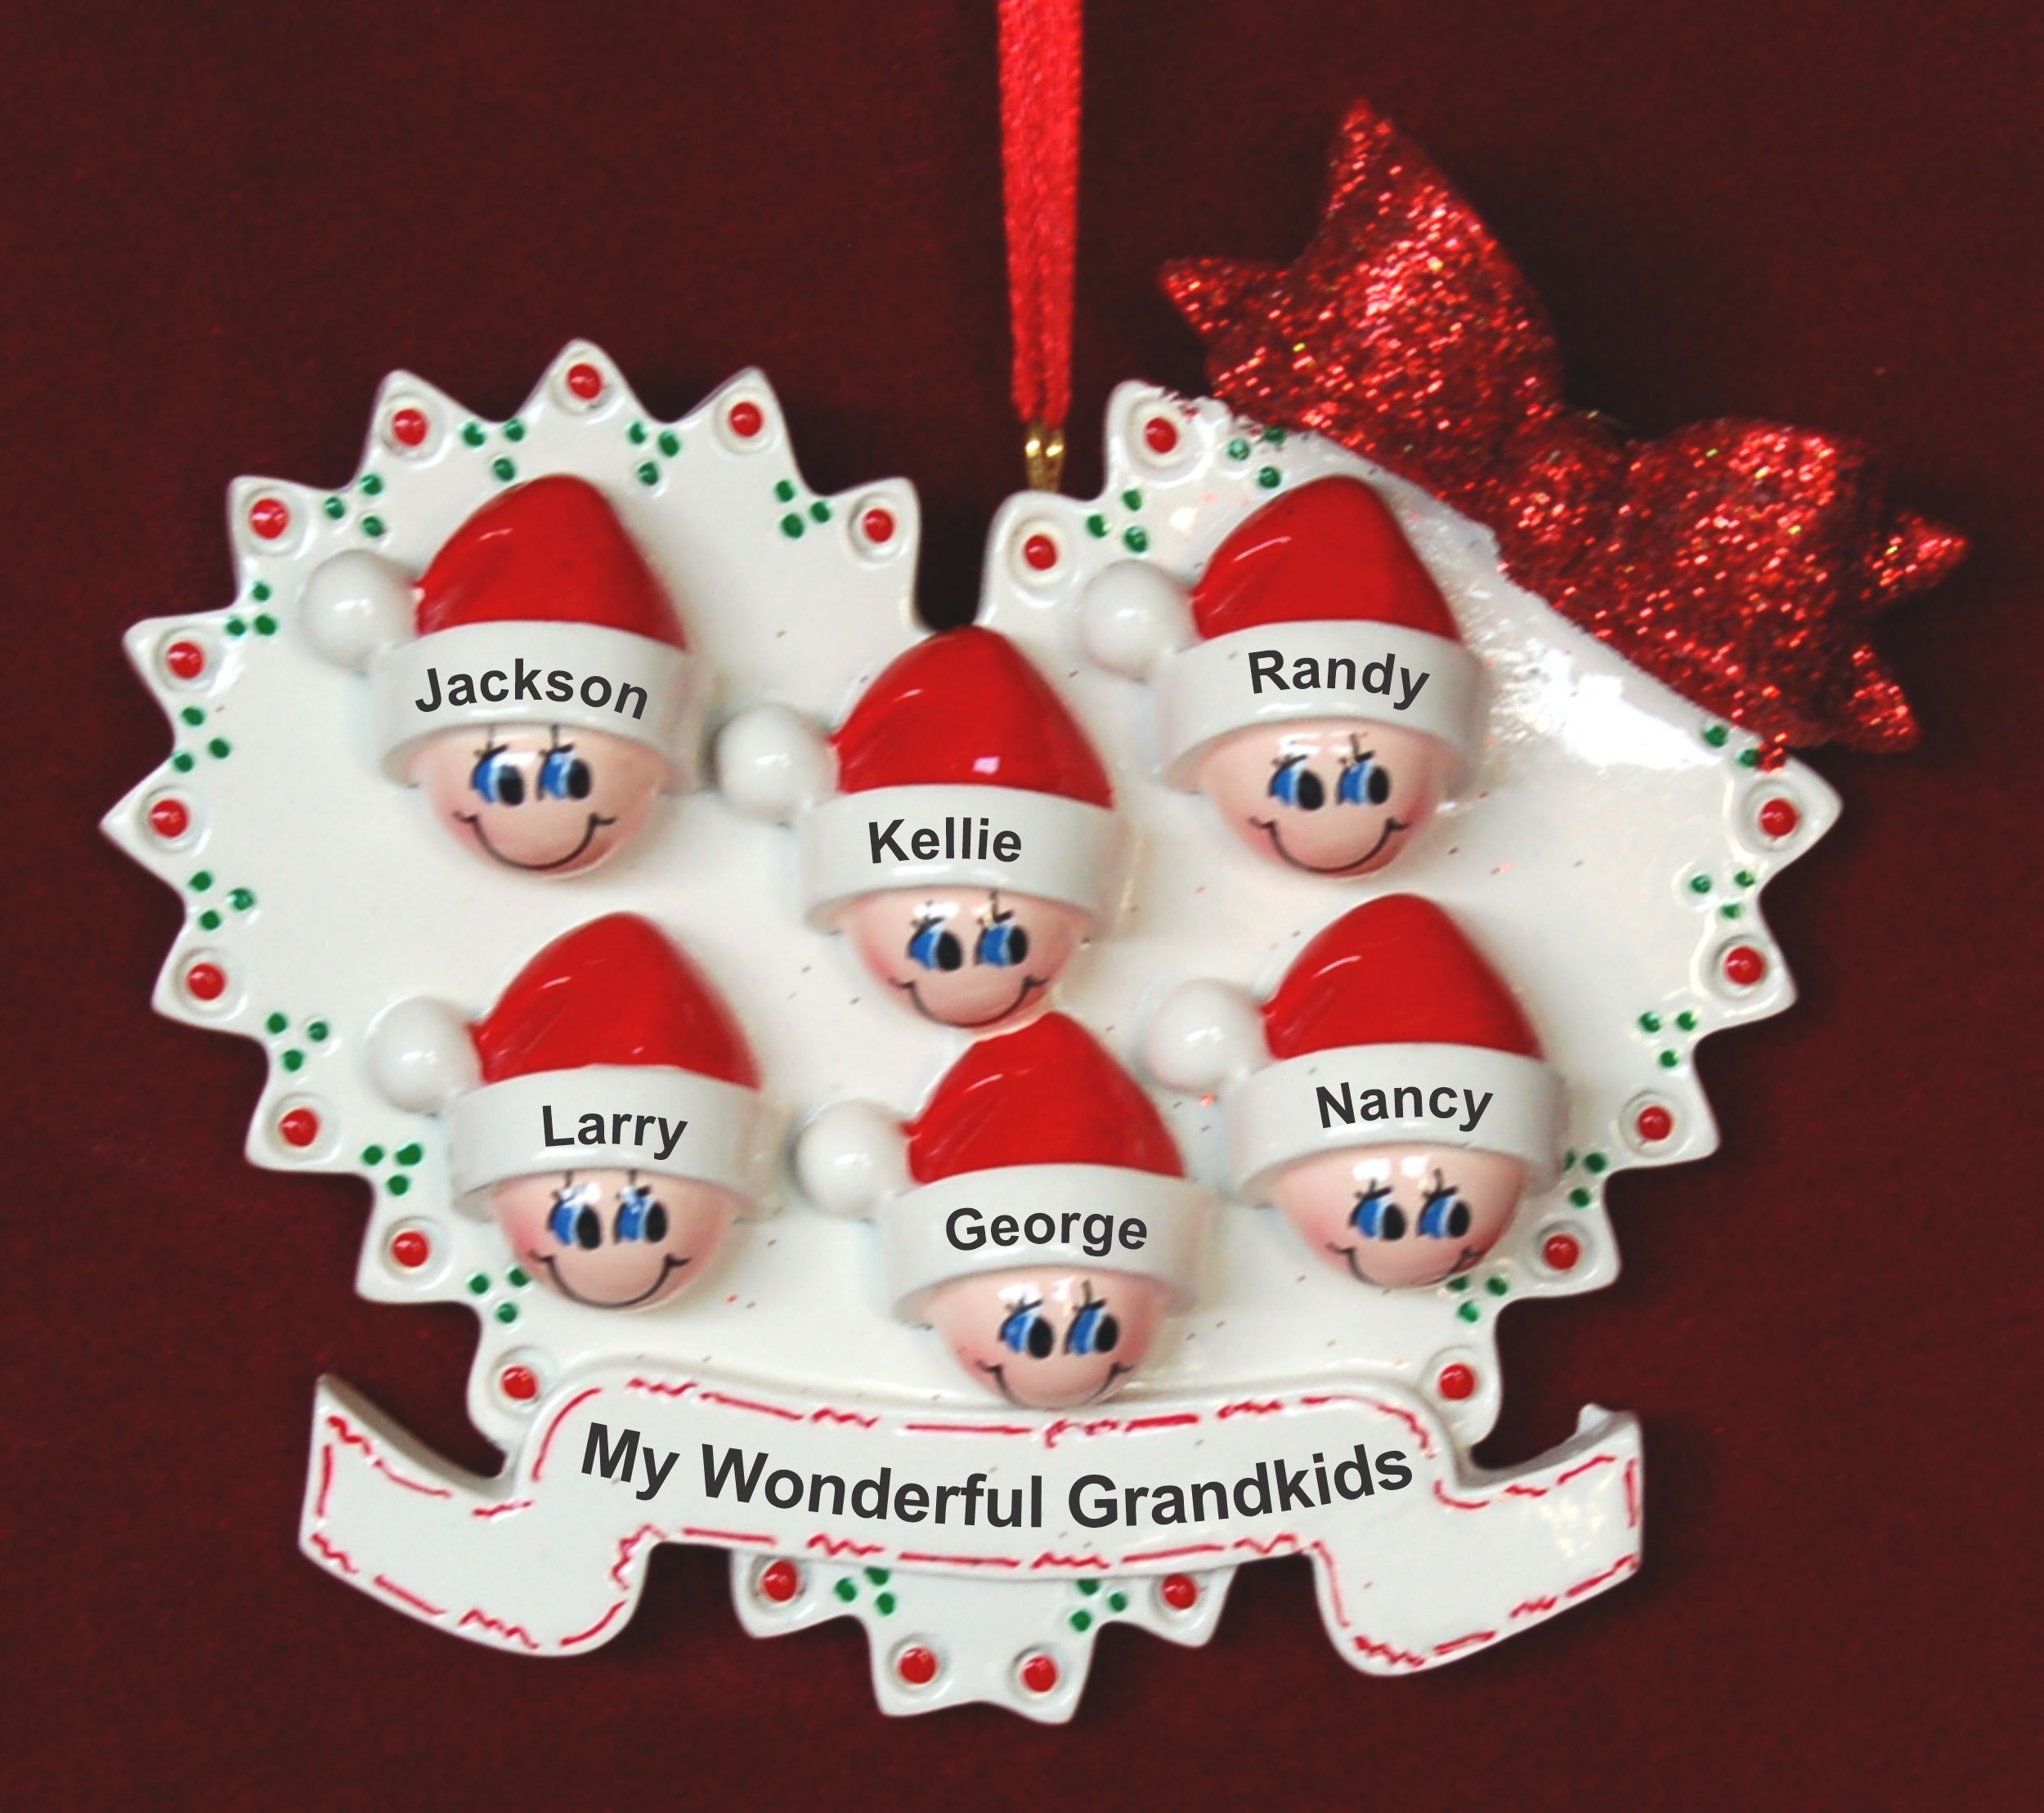 Grandparents Christmas Ornament Loving Heart 6 Grandkids Personalized by RussellRhodes.com